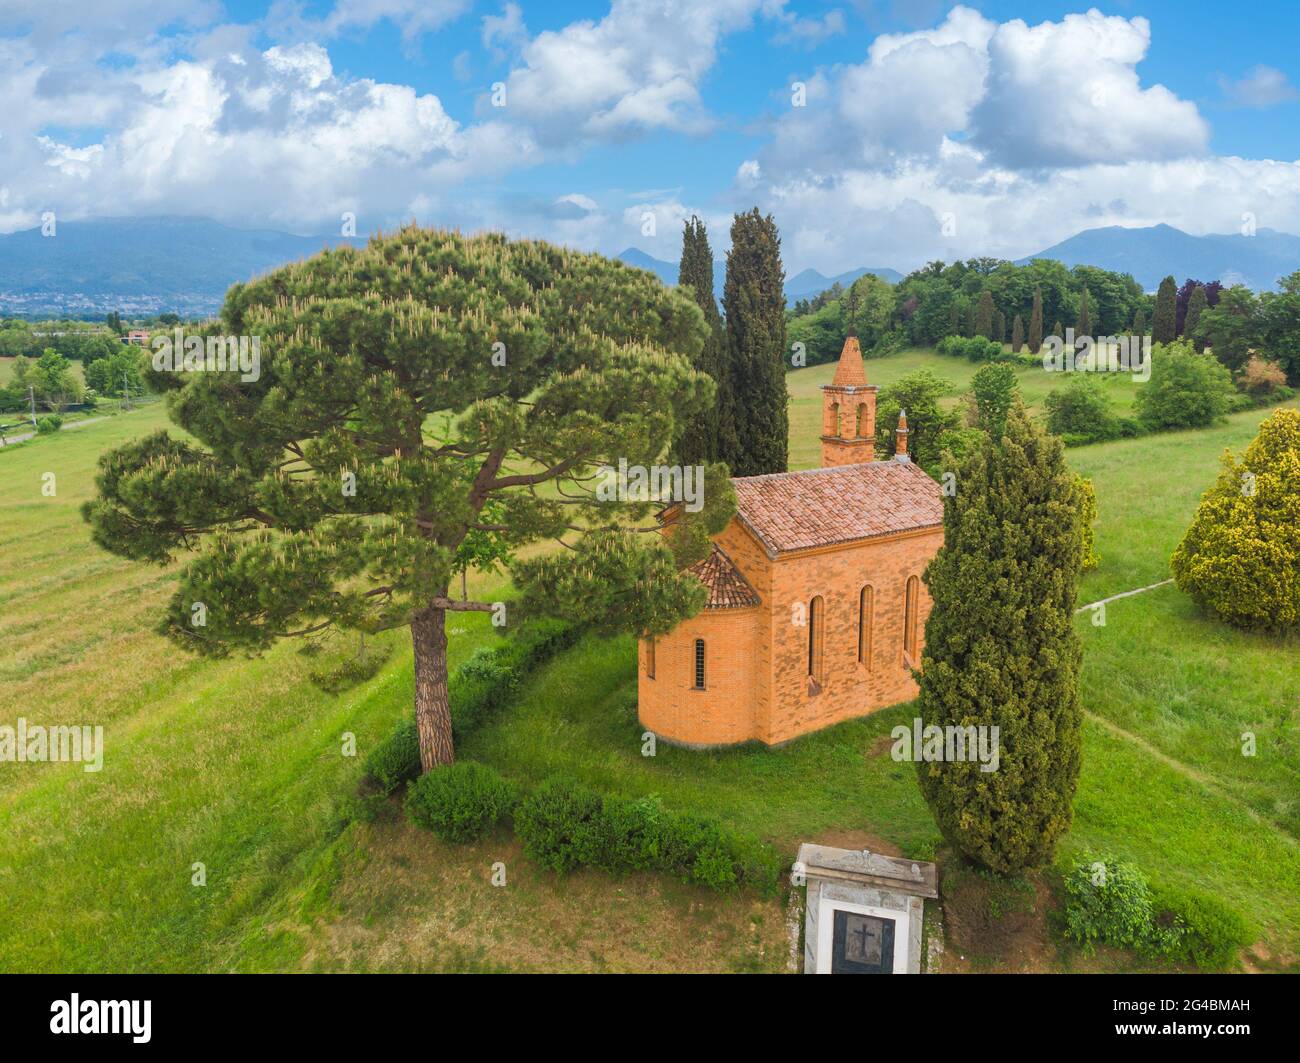 The red small church of Pomelasca aerial shot, Como, Italy Stock Photo